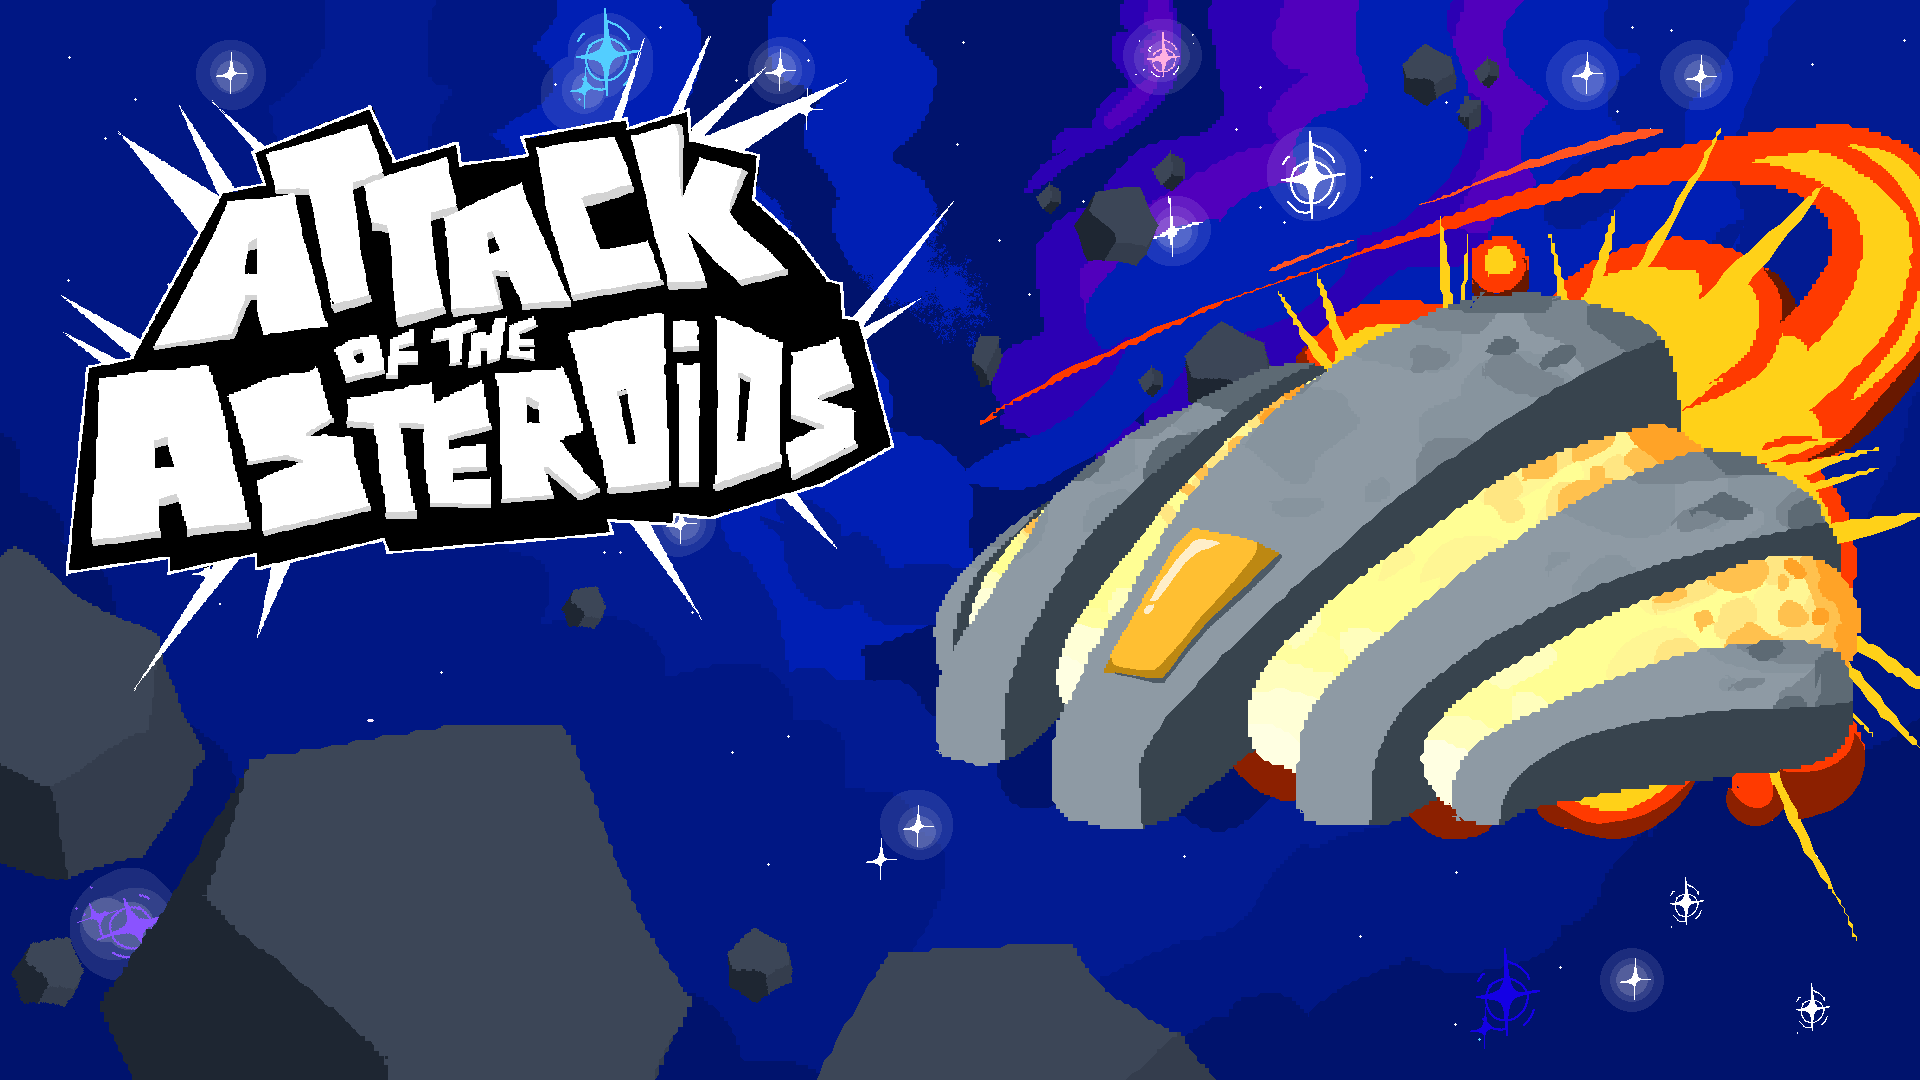 Attack of the Asteroids